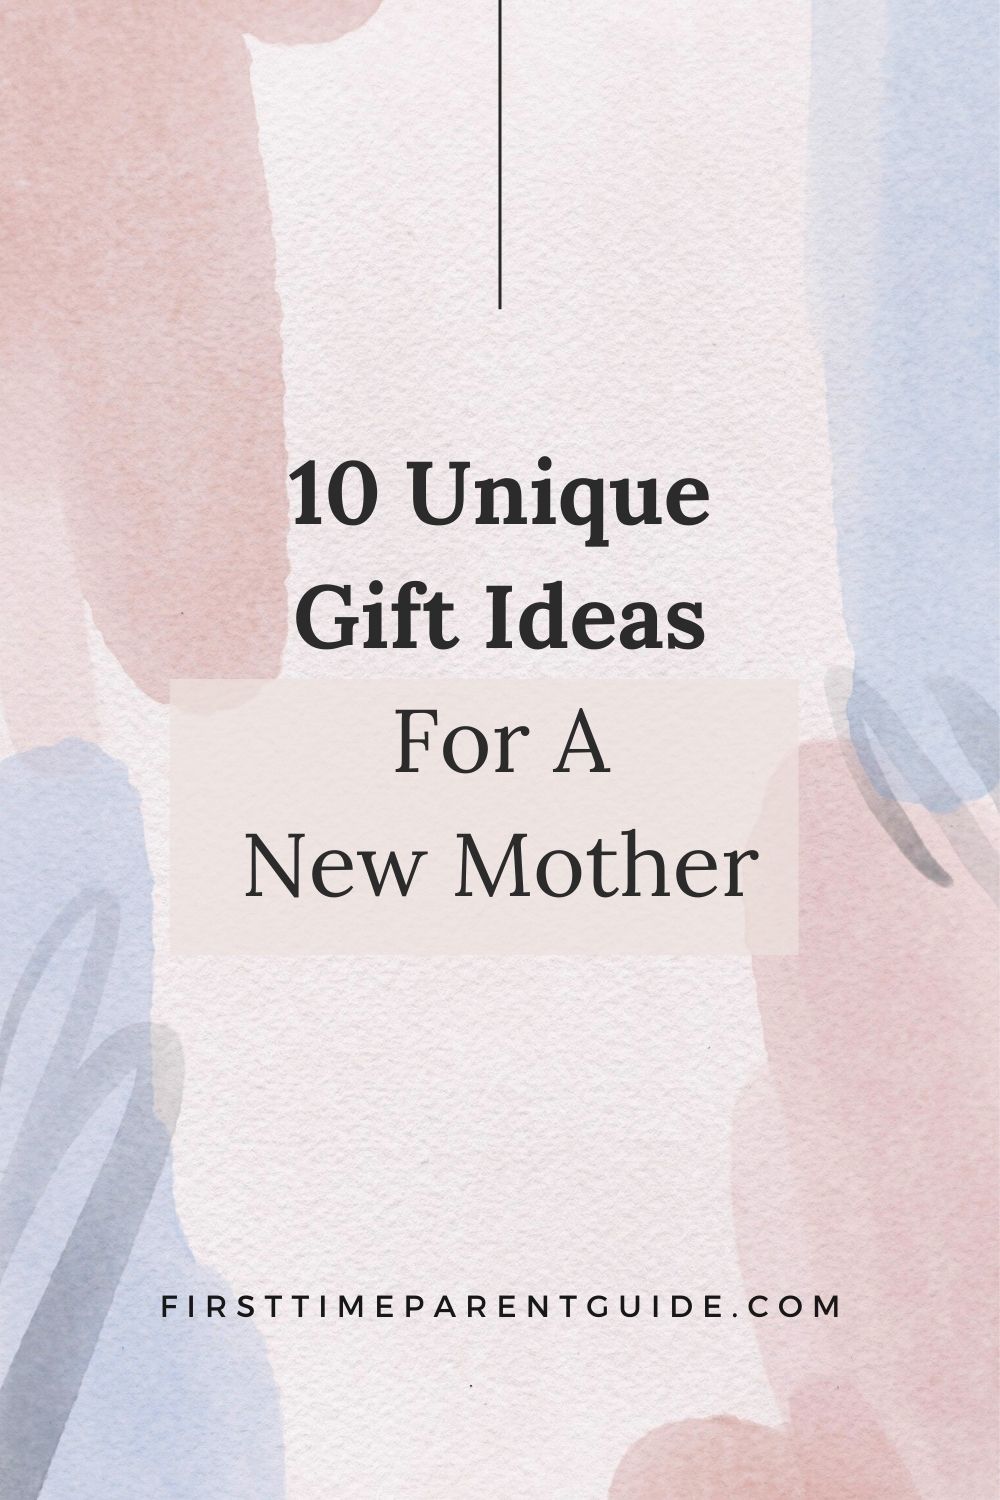 Gift Ideas For A New Mother